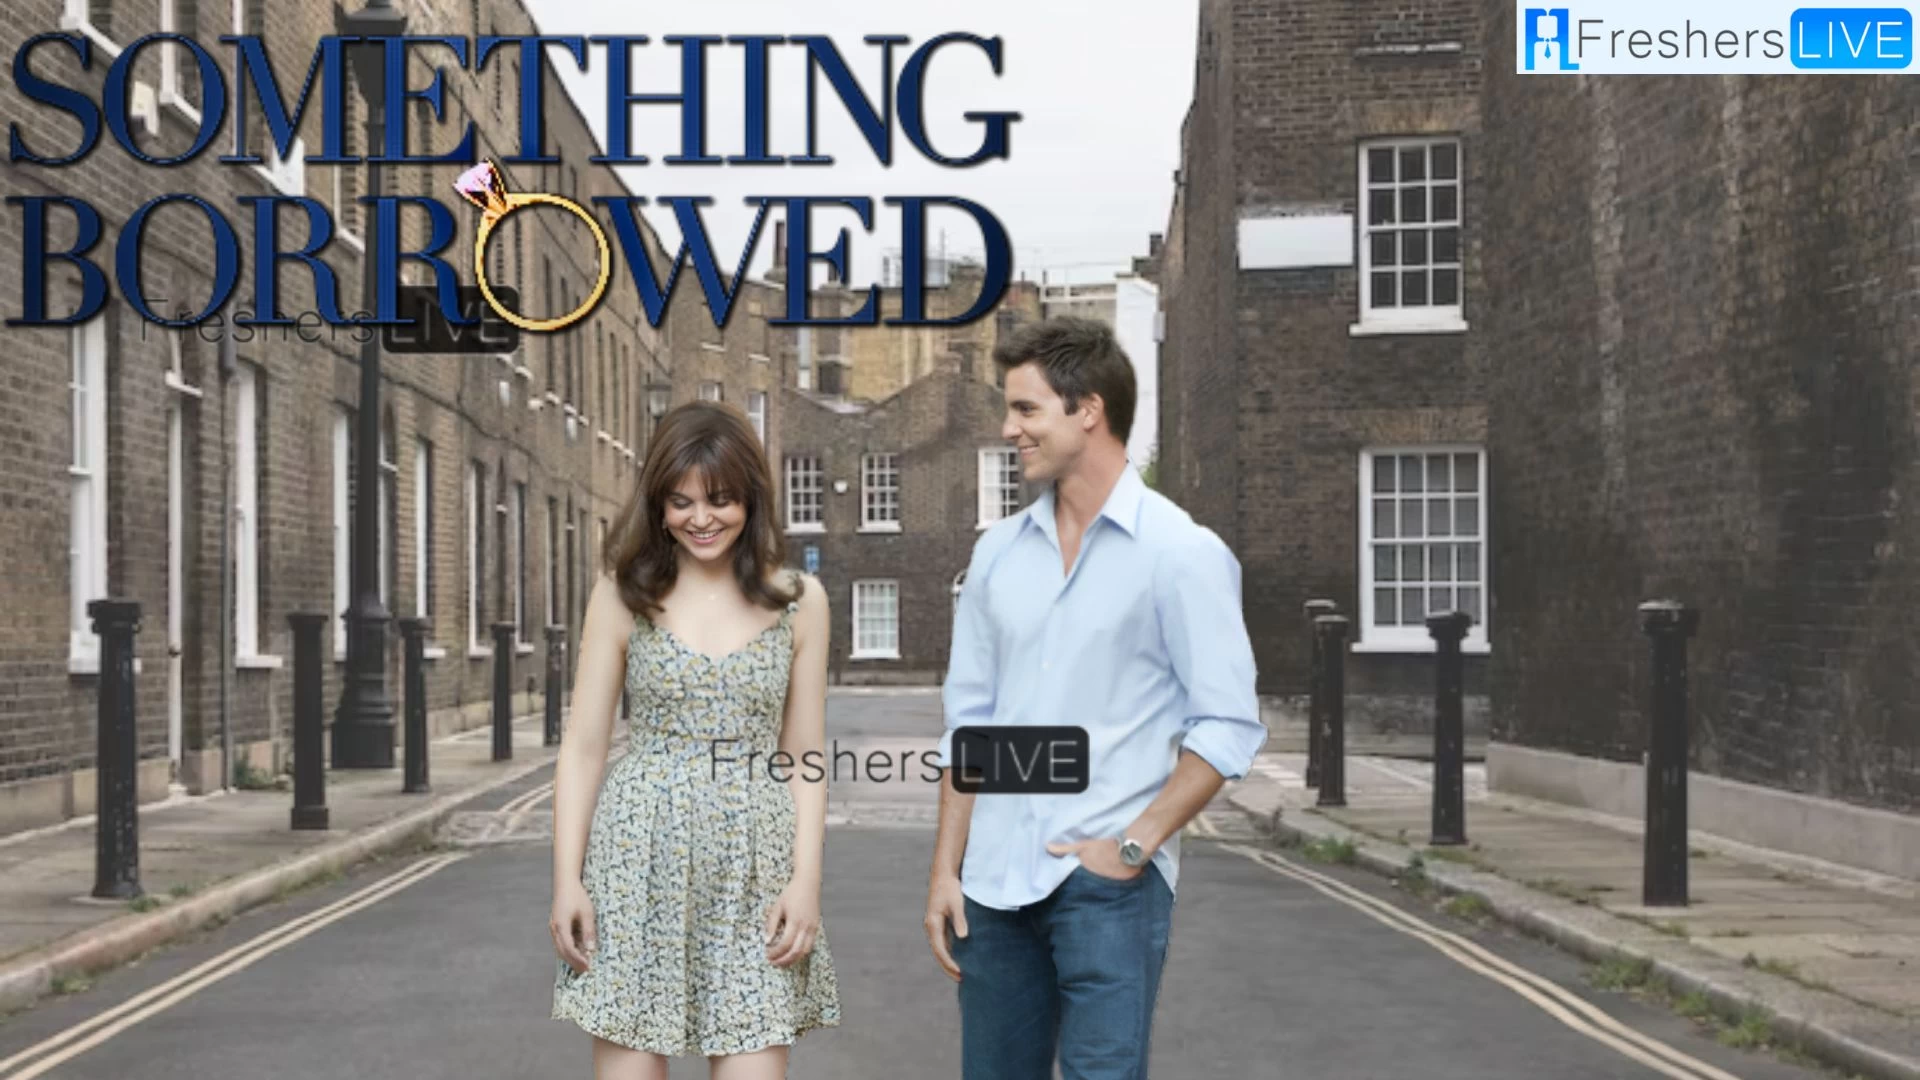 Where to Stream Something Borrowed? How to Watch Something Borrowed?